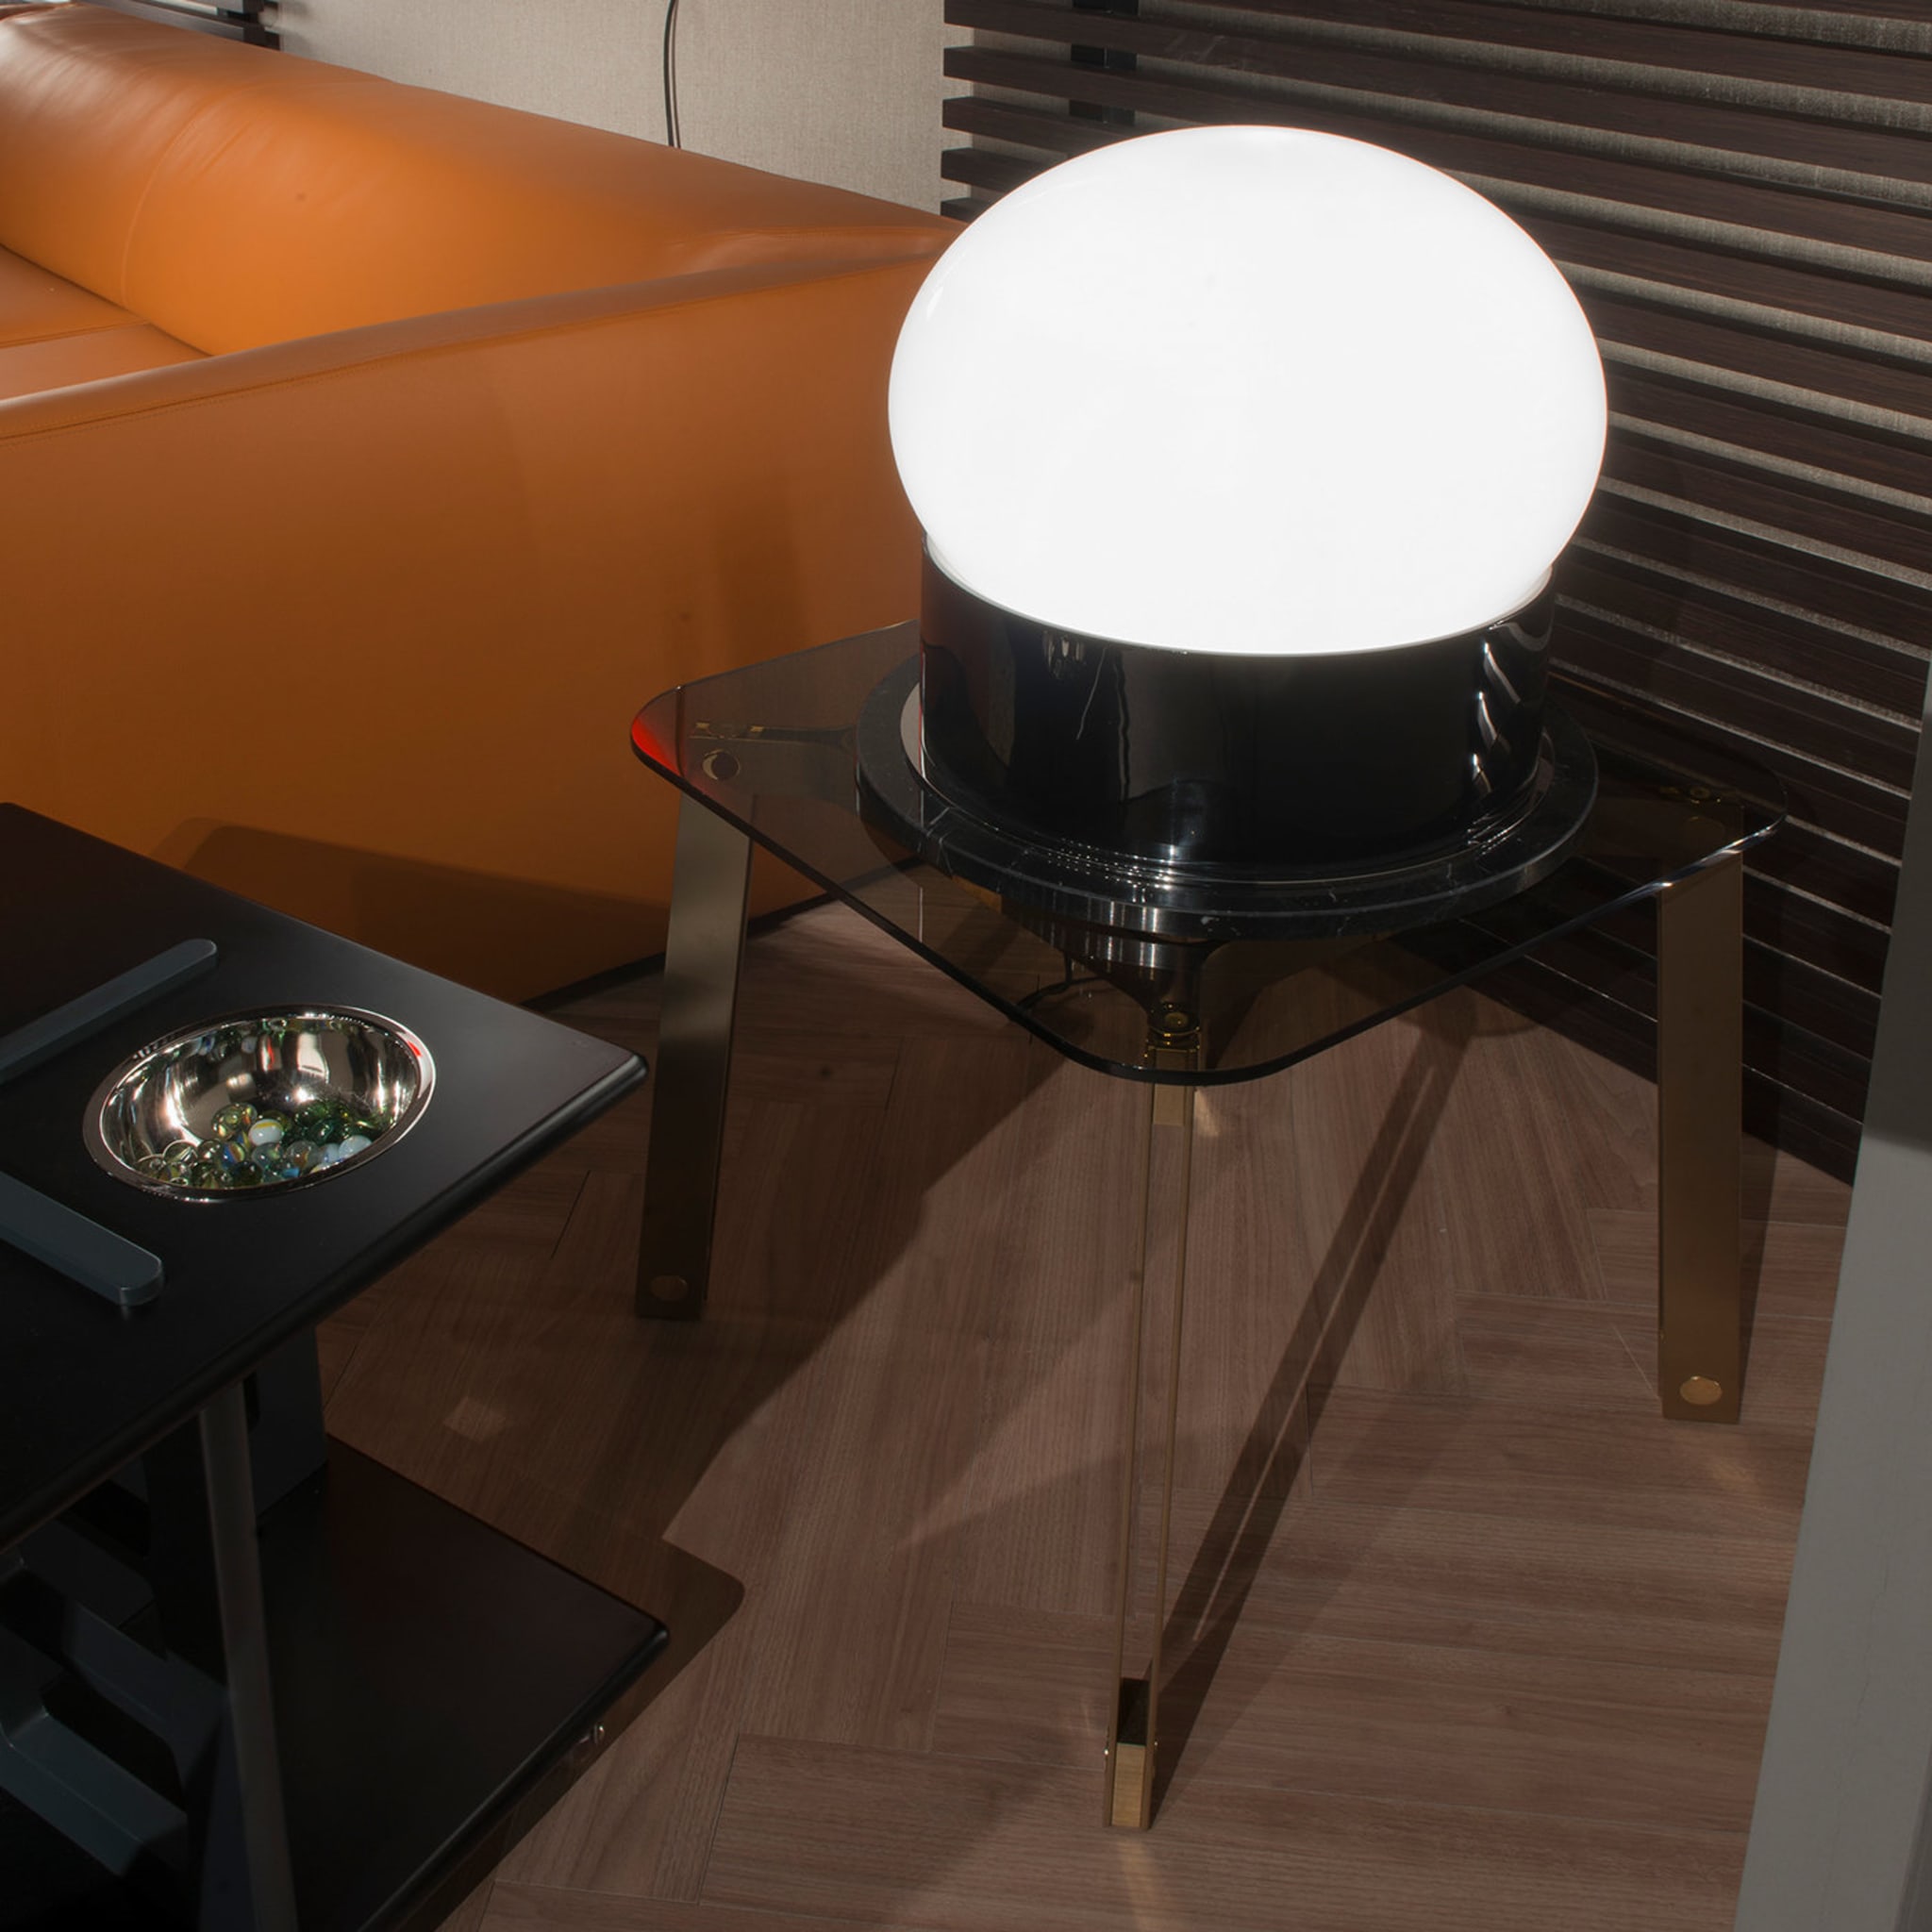 Maria Black Table Lamp by Ynterior Lab - Alternative view 4